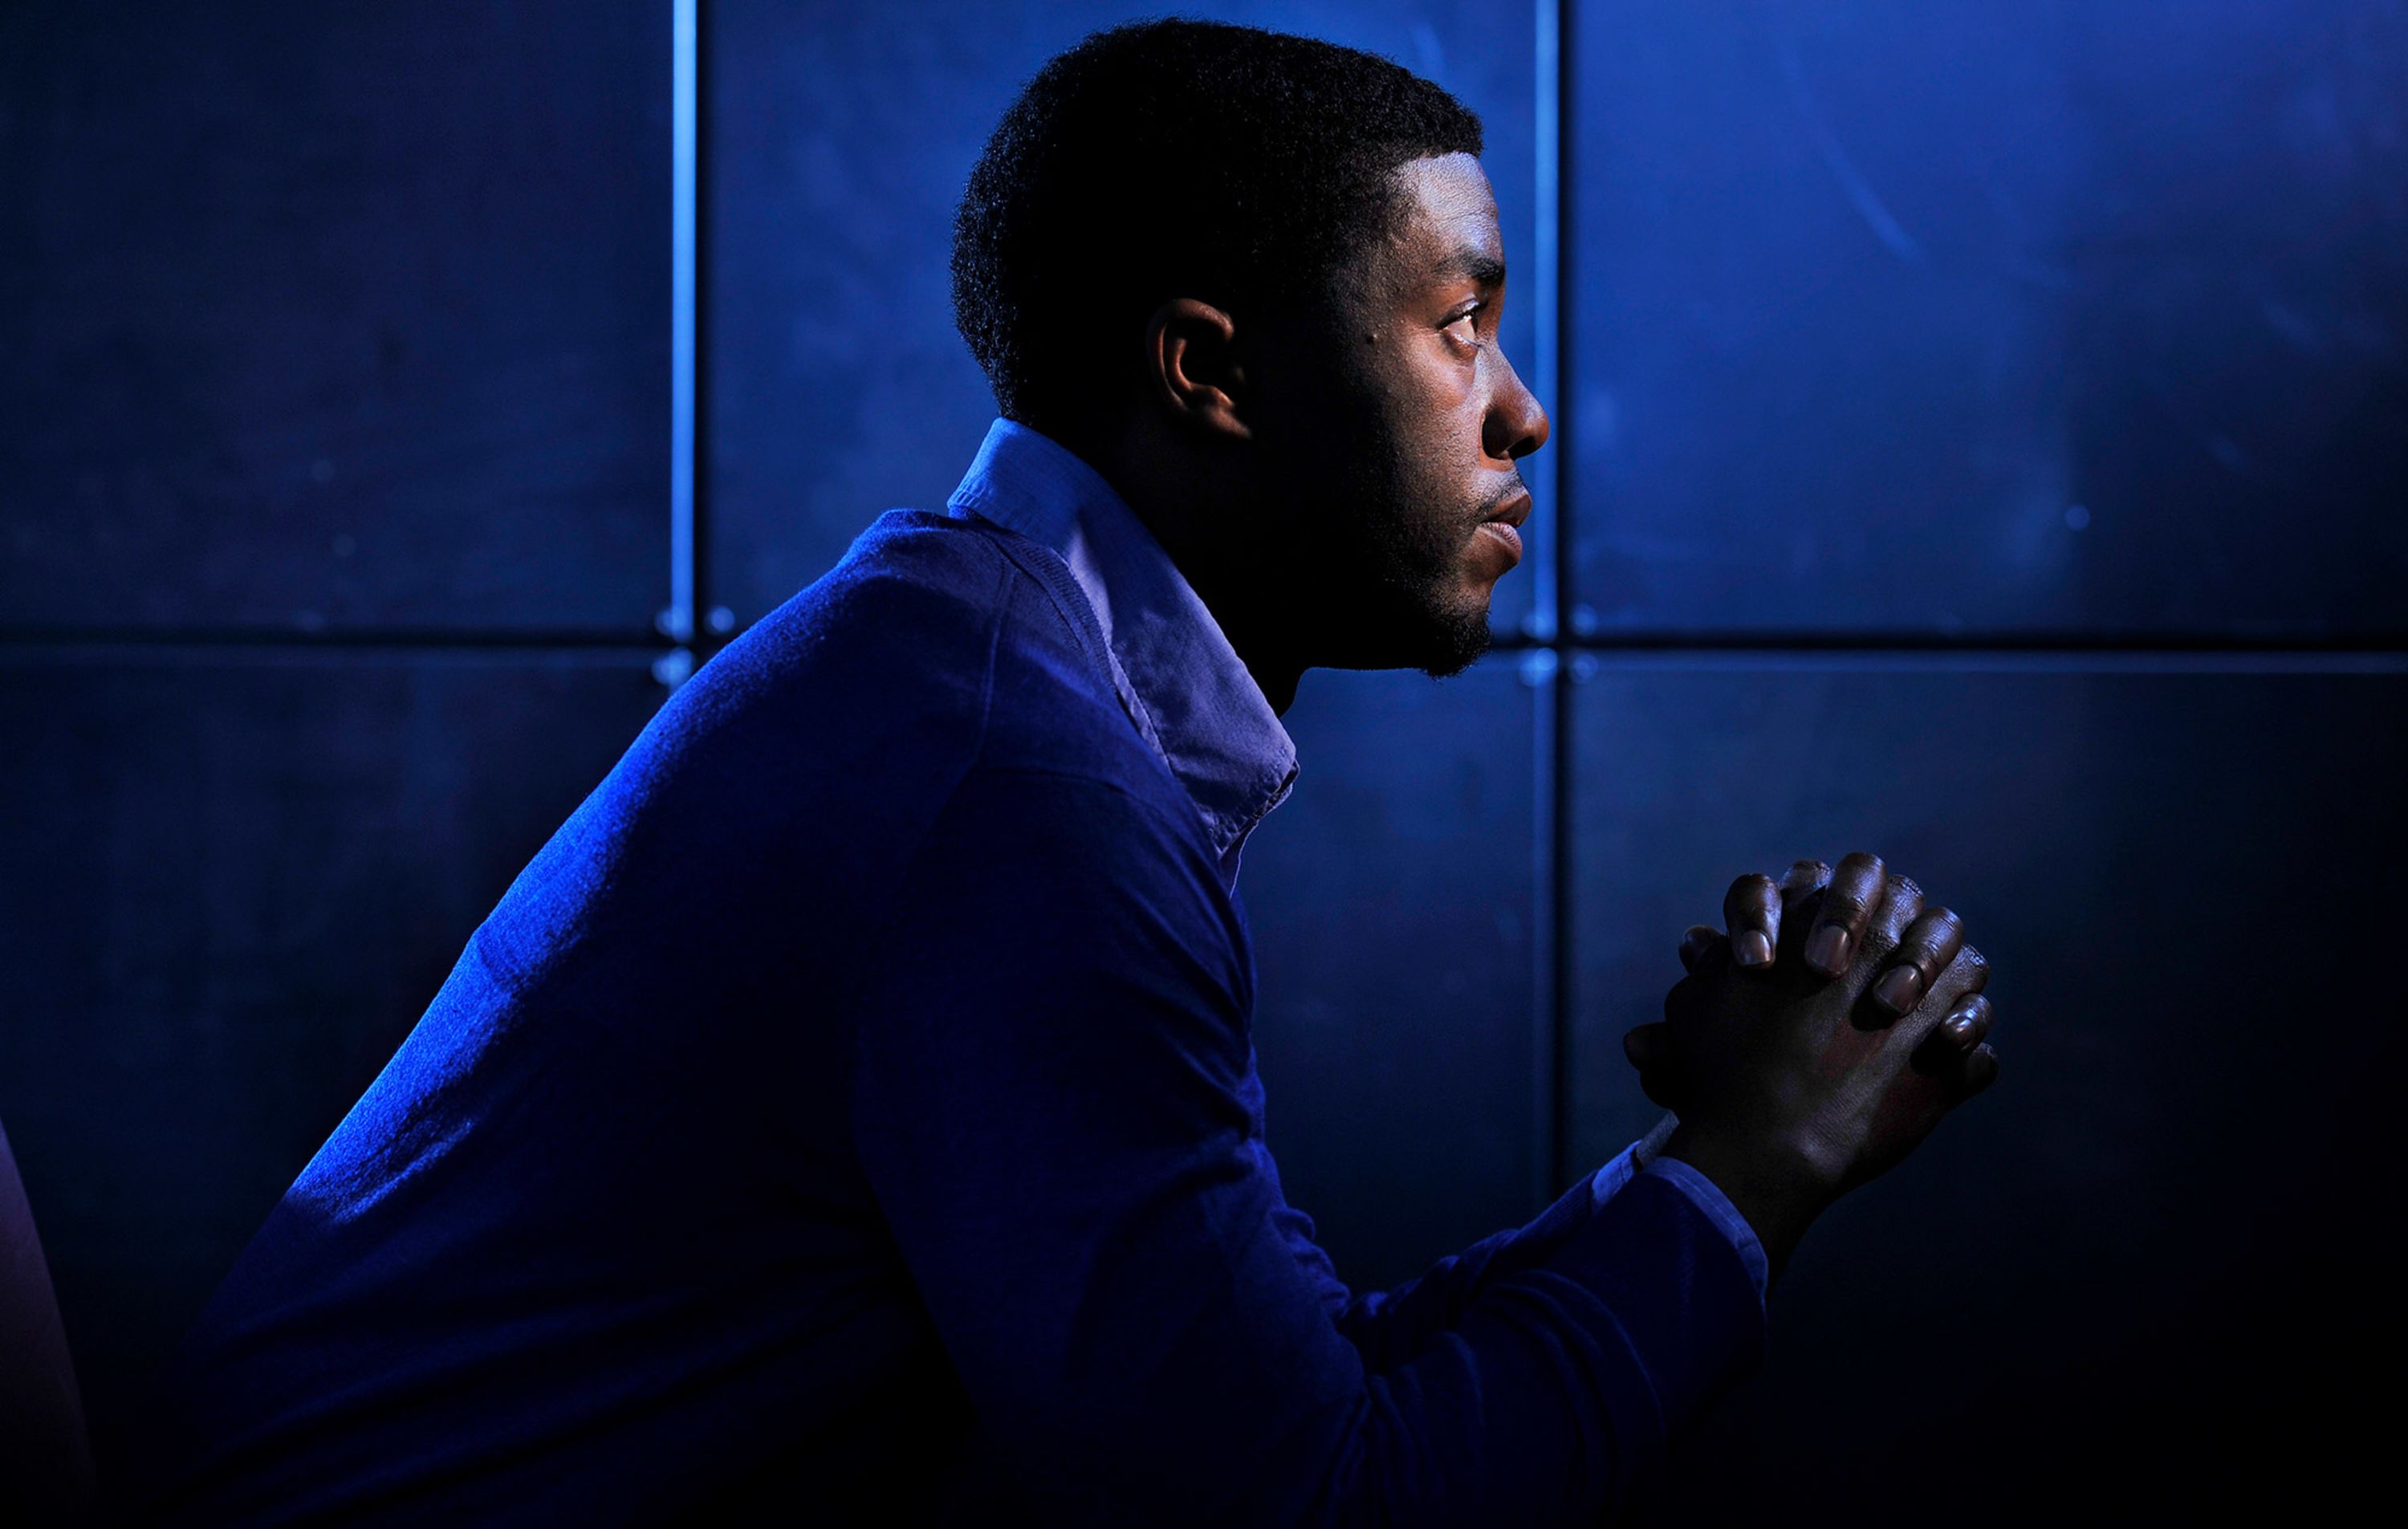 Actor Chadwick Boseman poses for a portrait in 2013.